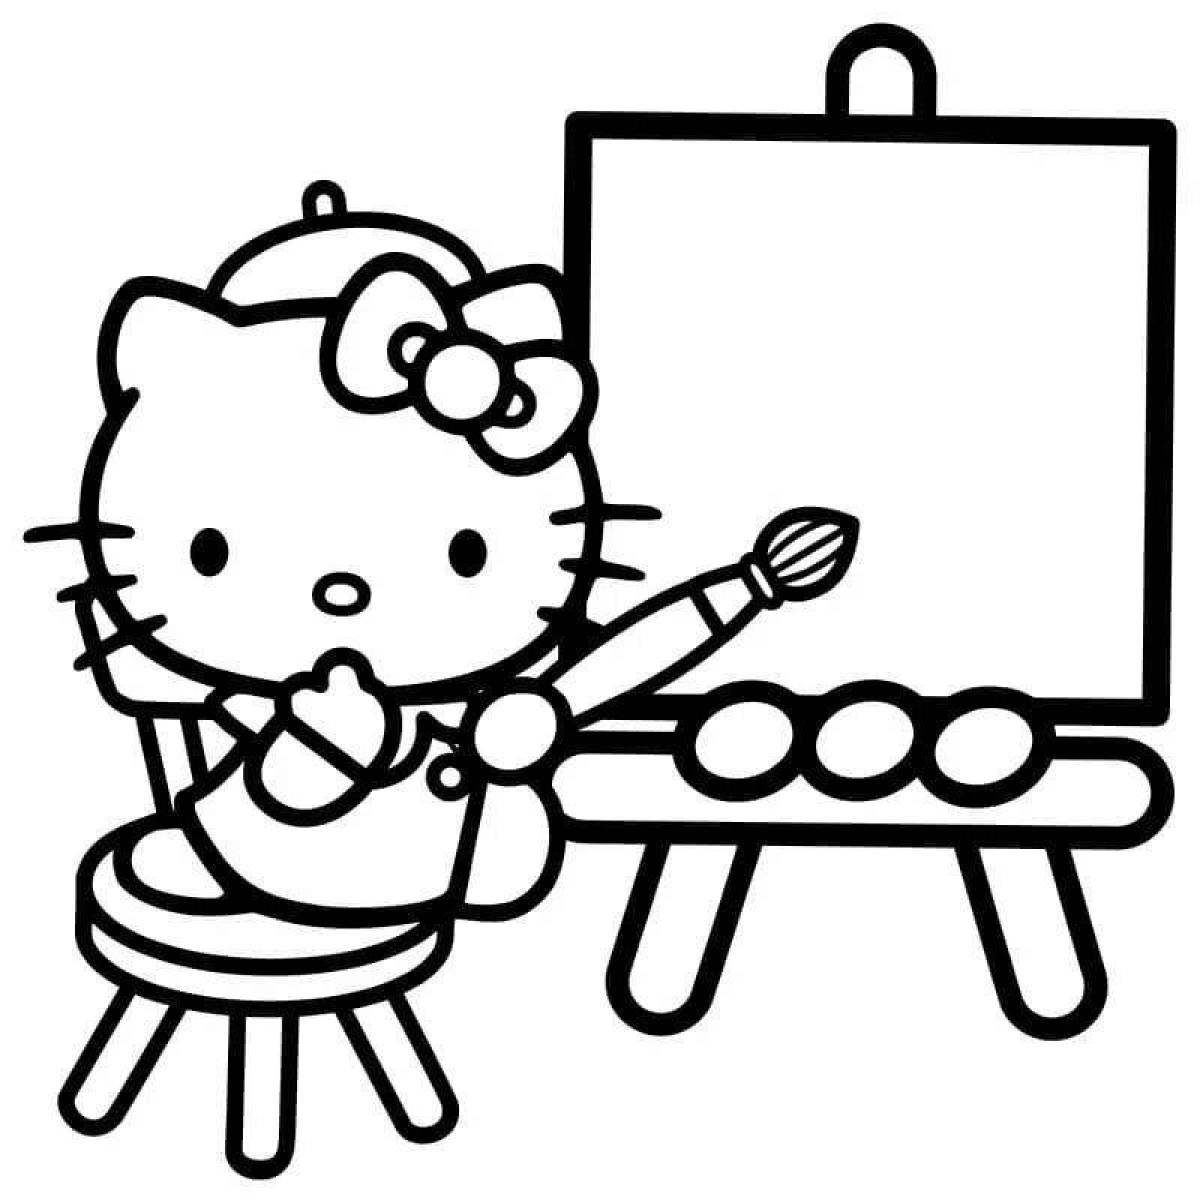 Bright hello kitty and her friends coloring book